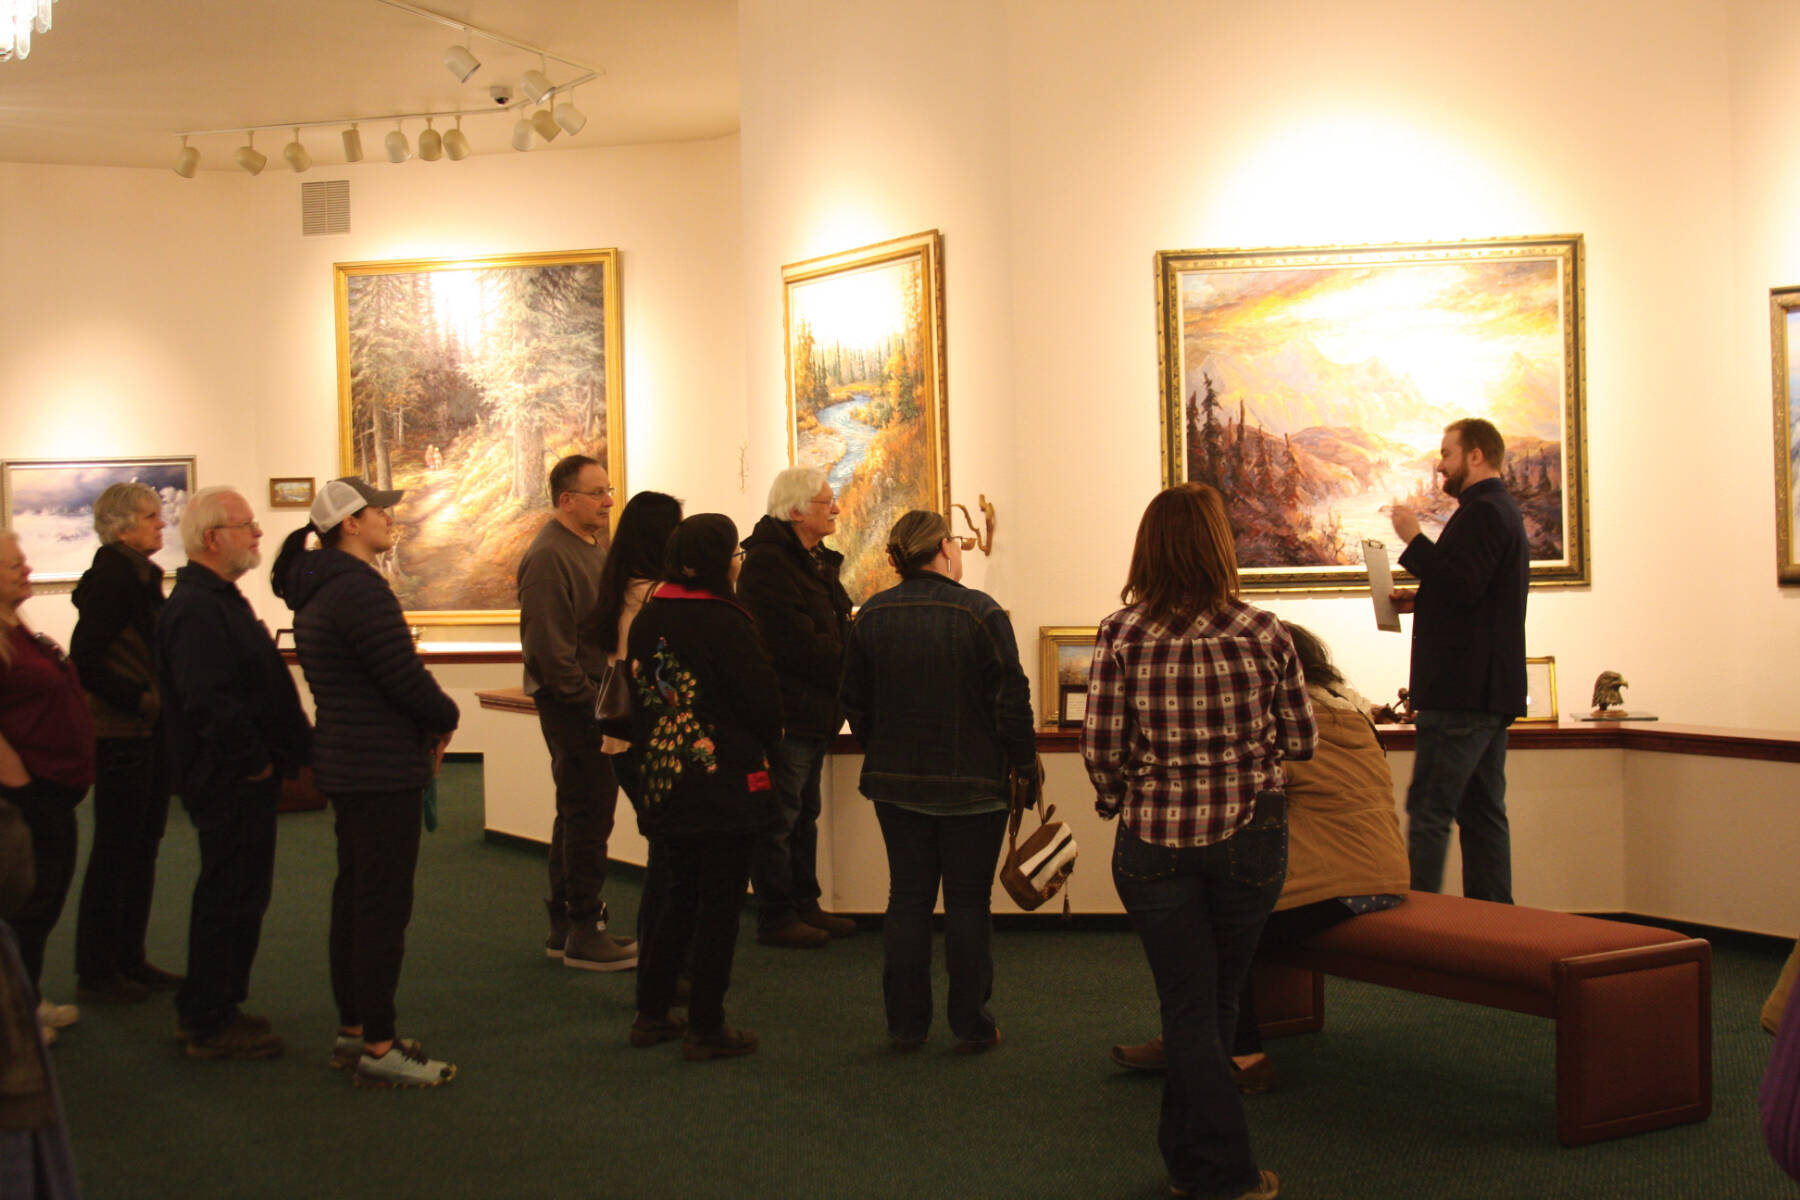 Curator Barnabas Firth (right) tells stories of artworks by Norman Lowell to attendees of the invitational gathering on Saturday, April 29, 2023 at the Norman Lowell Art Gallery in Anchor Point, Alaska. Photo by Delcenia Cosman